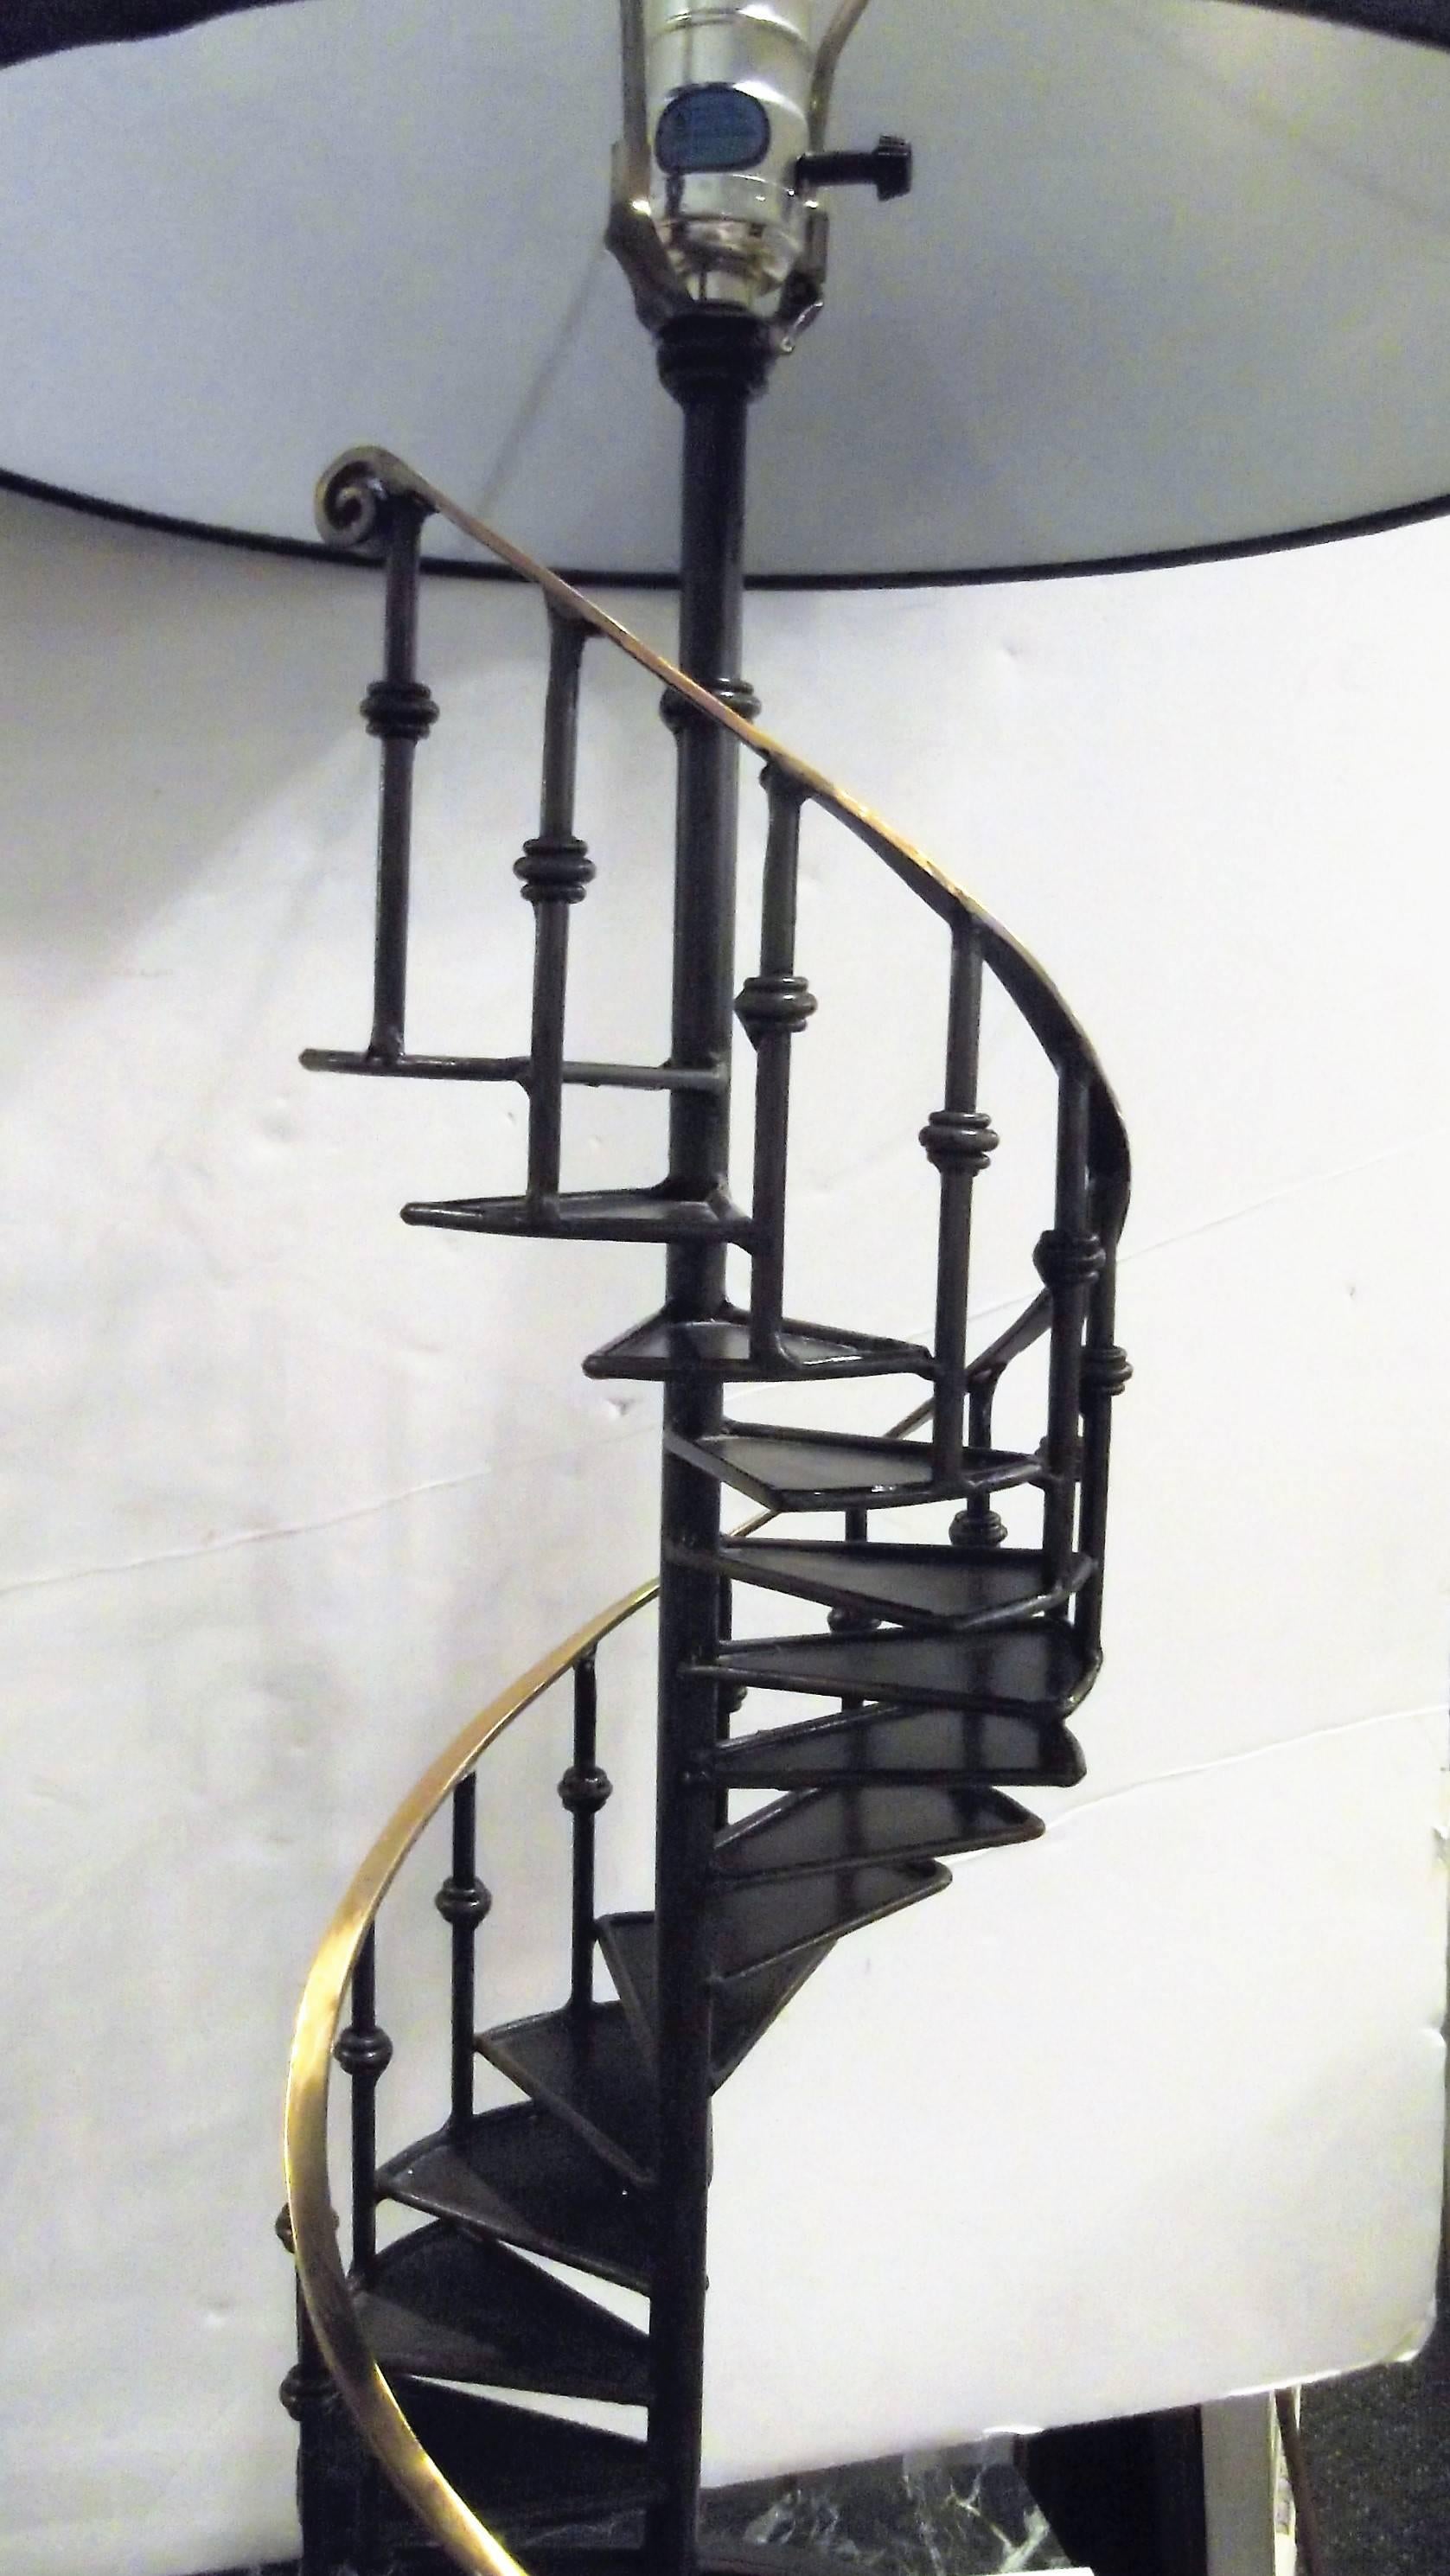 Patinated and polished brass architectural model of a spiral staircase as a lamp. This is a decorator item made for Palecek of NYC. Very high style with a curved polished hand rail accent. Topped with a simple black fabric drum shade. The lamp to